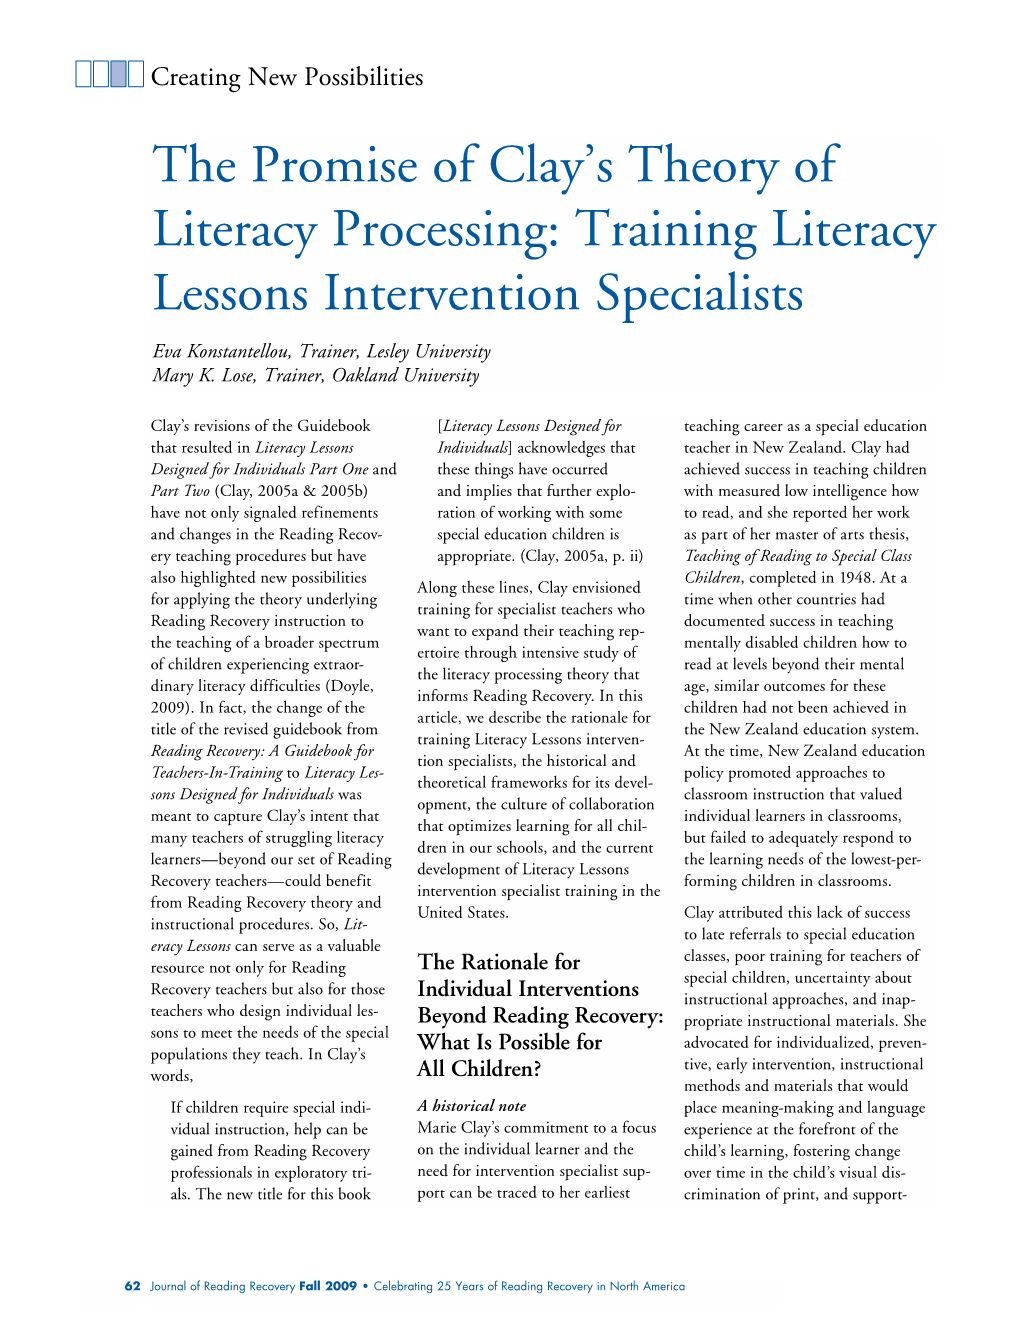 The Promise of Clay's Theory of Literacy Processing: Training Literacy Lessons Intervention Specialists